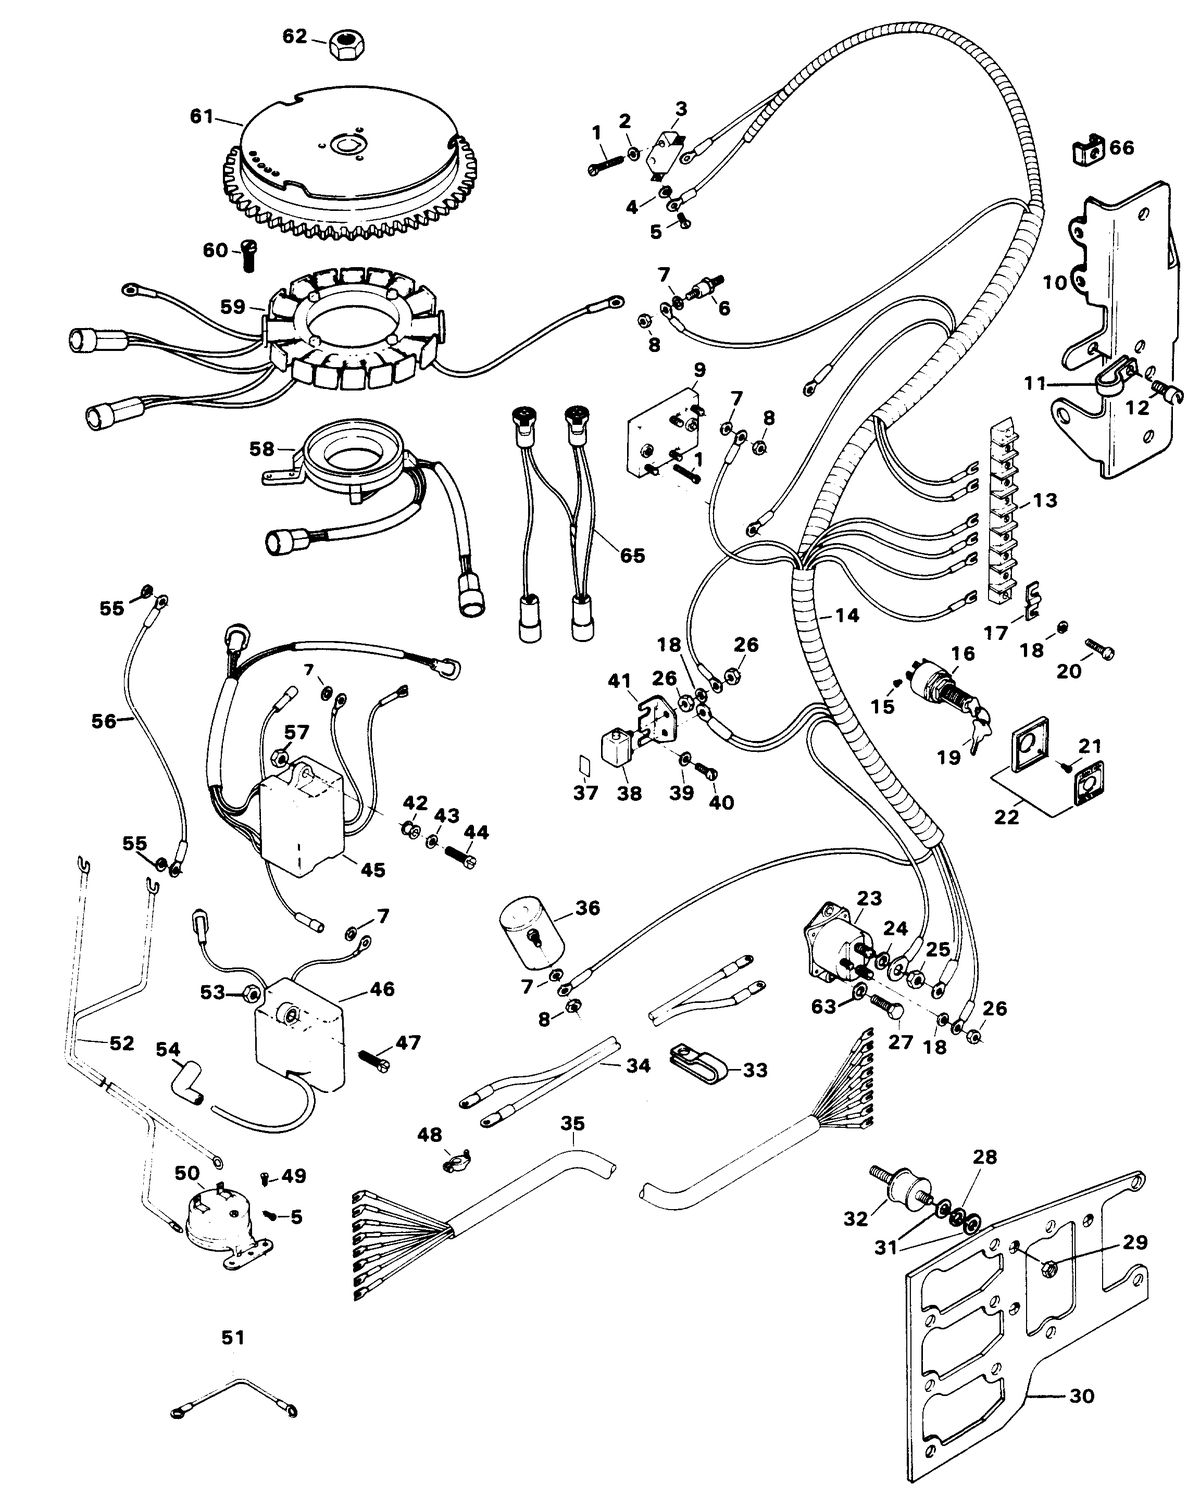 CHRYSLER 85 H.P. ELECTRICAL COMPONENTS